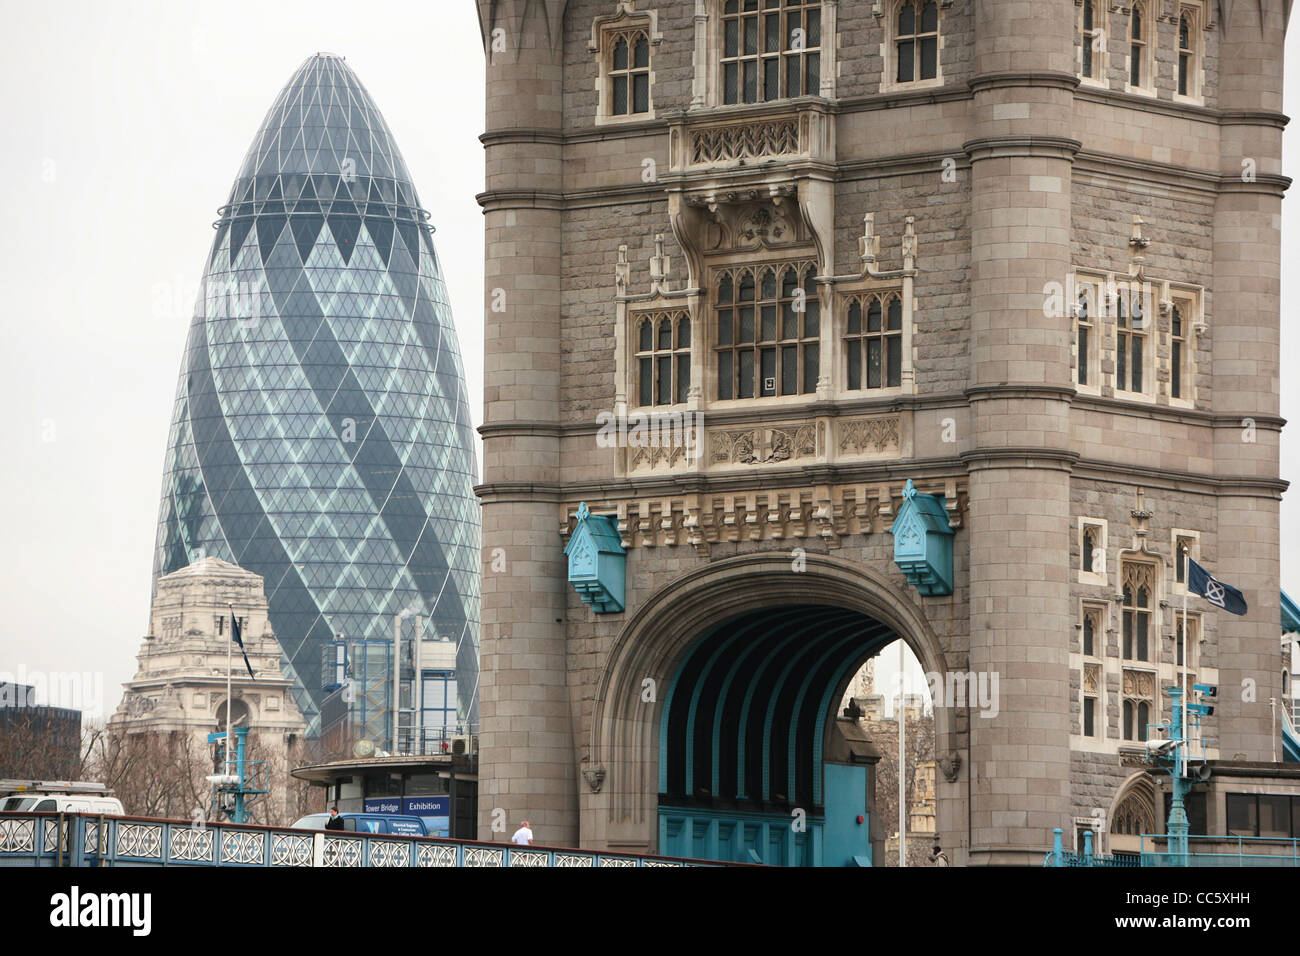 A view of London's old and new, Tower Bridge with the Gherkin Building in the distance. Stock Photo